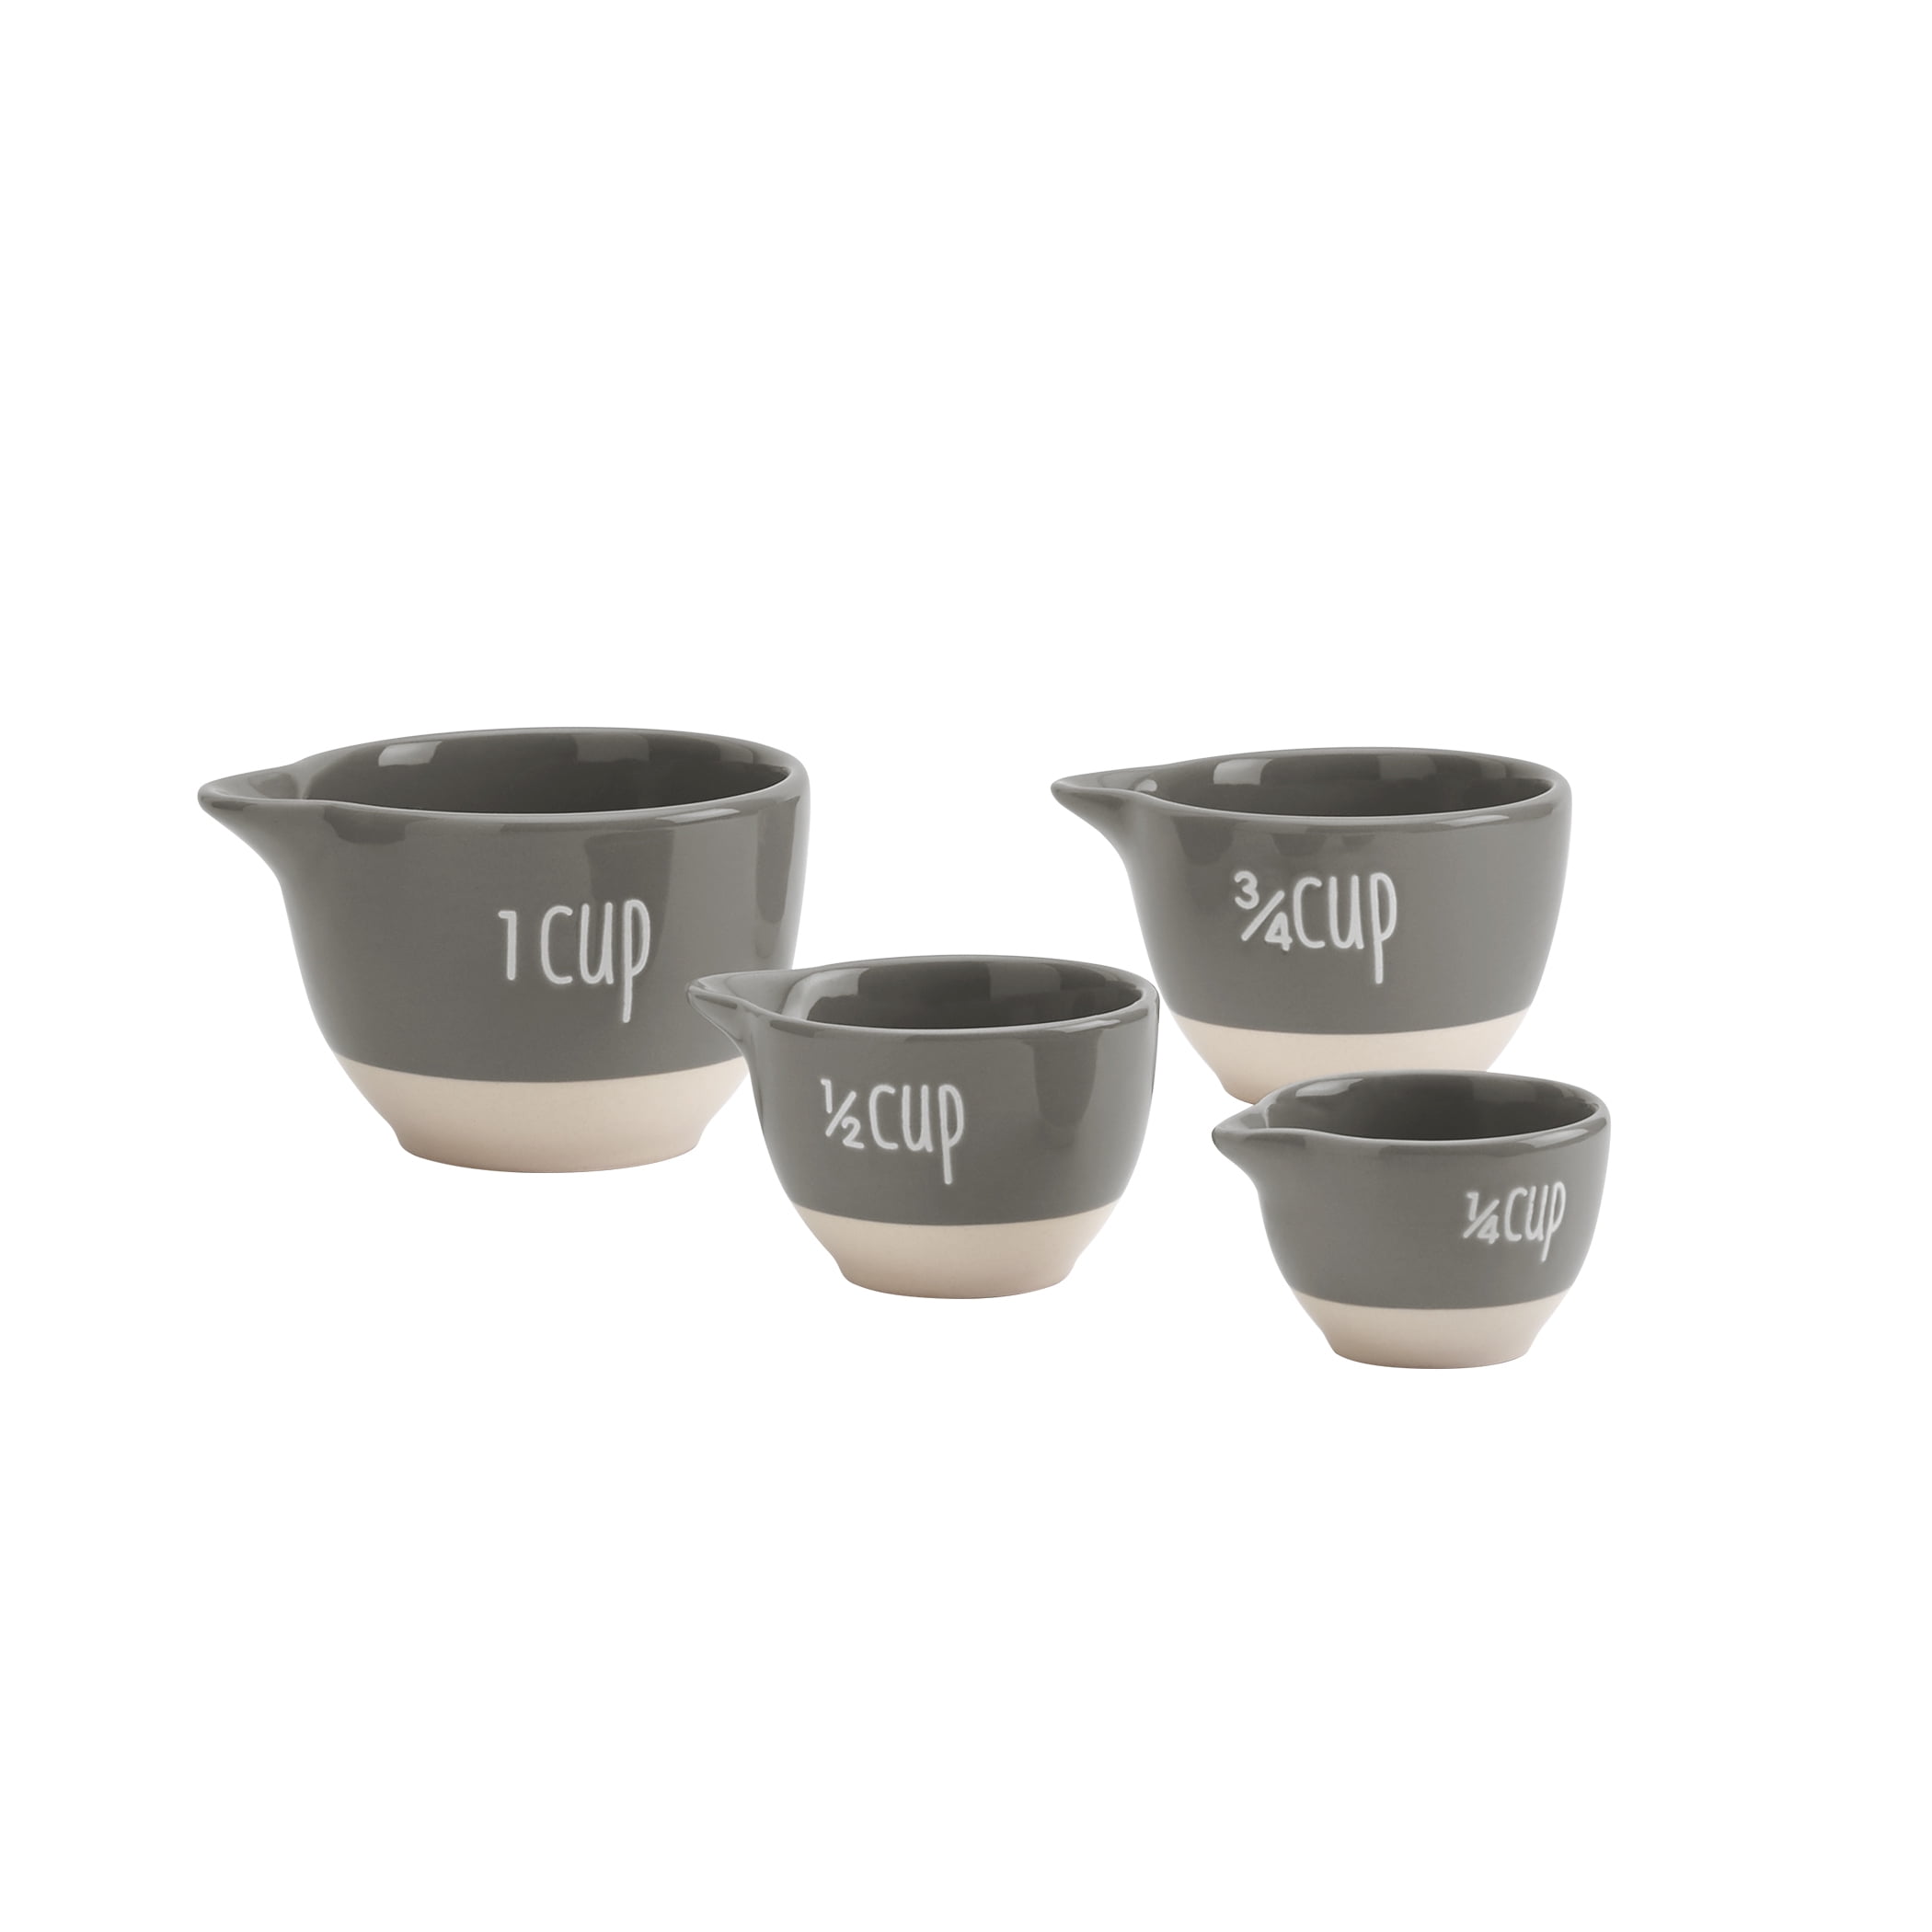 Tabletops Gallery 9-Piece Ceramic Mixing Bowl Set - Red - 20339957